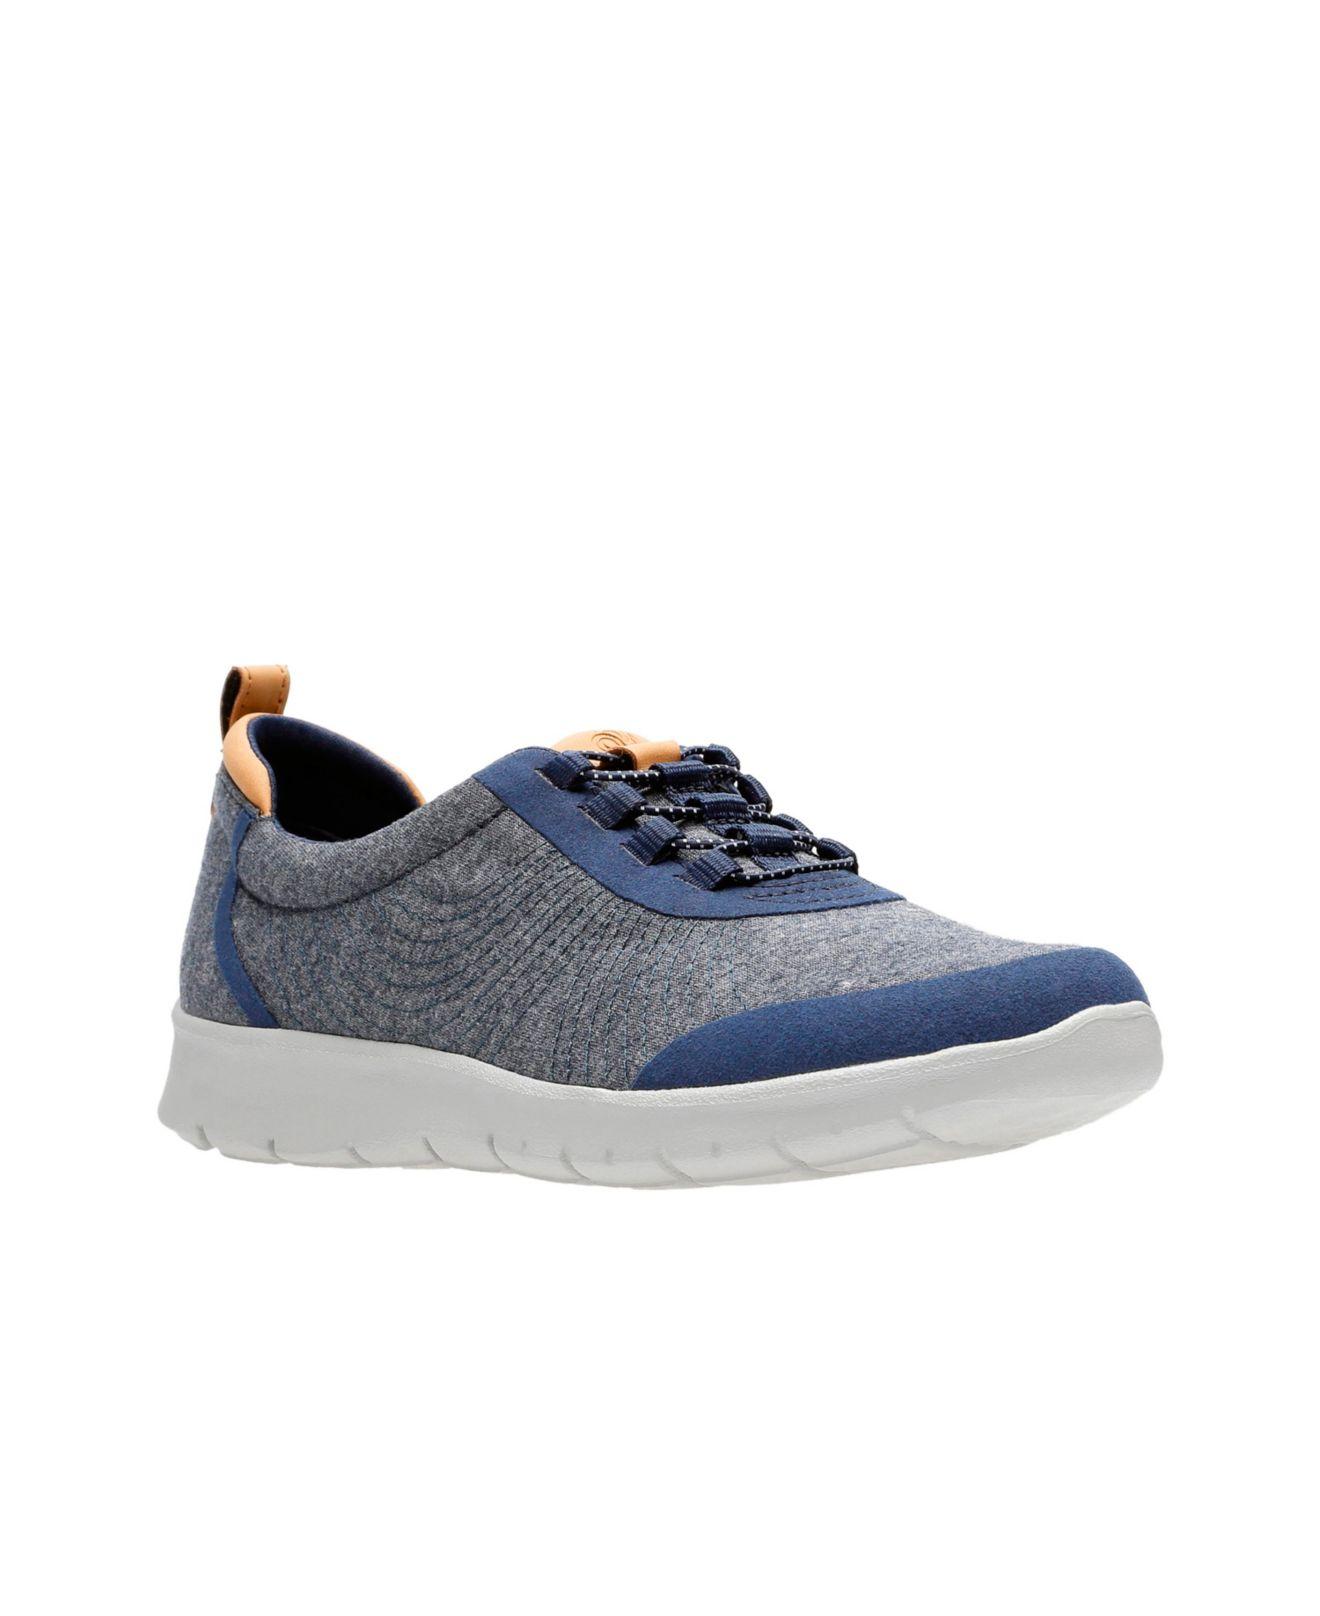 Clarks Cloudsteppers Step Allena Bay Sneakers in Navy (Blue) - Save 40% ...